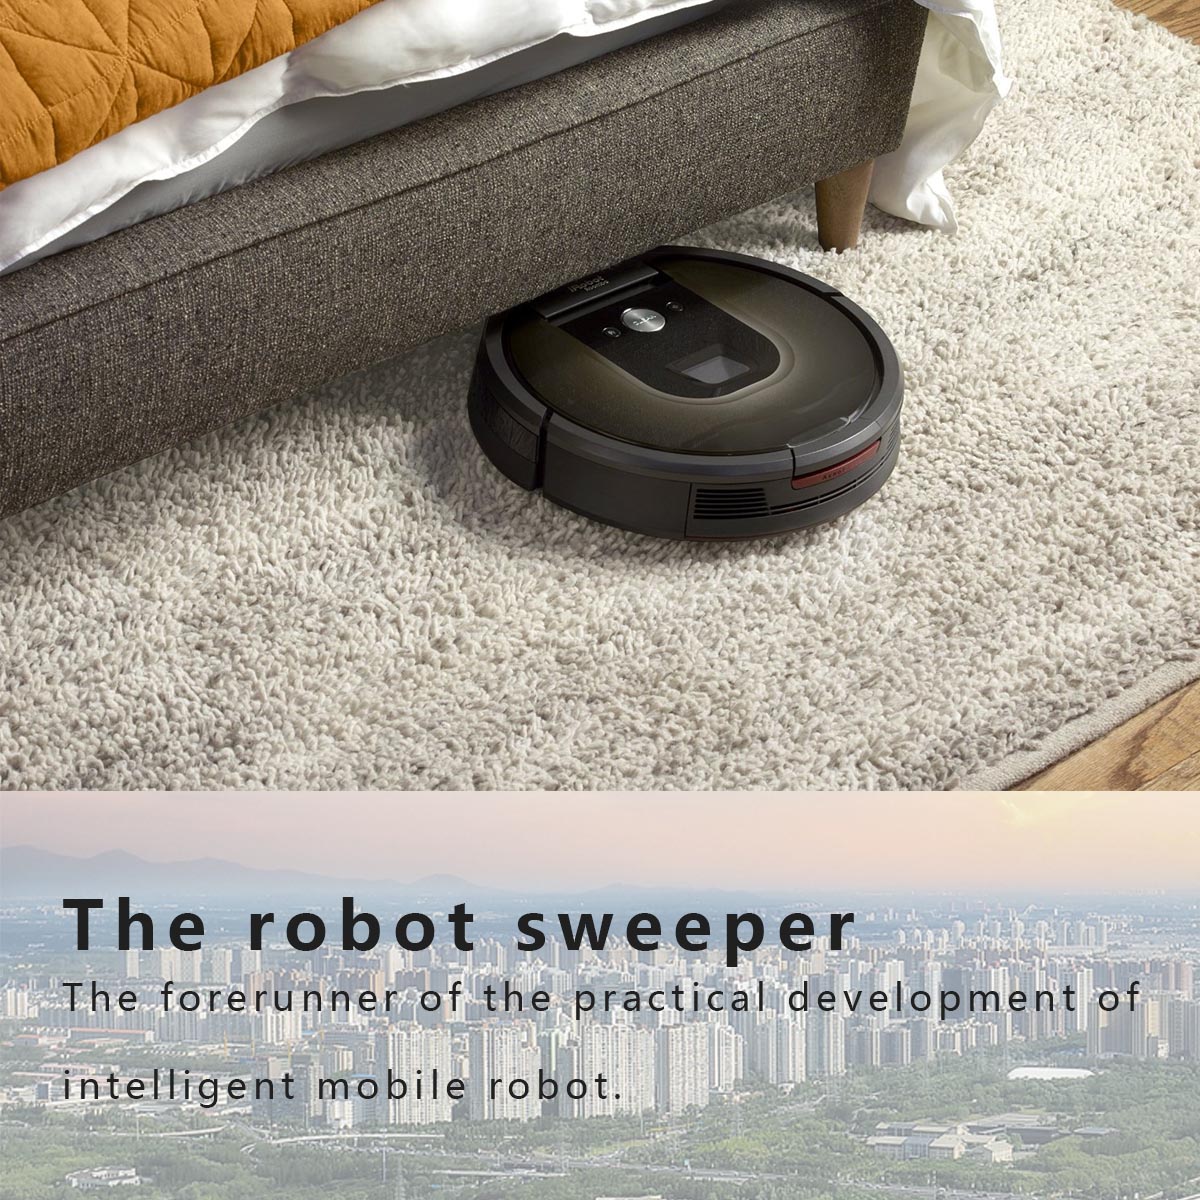 The robot sweeper